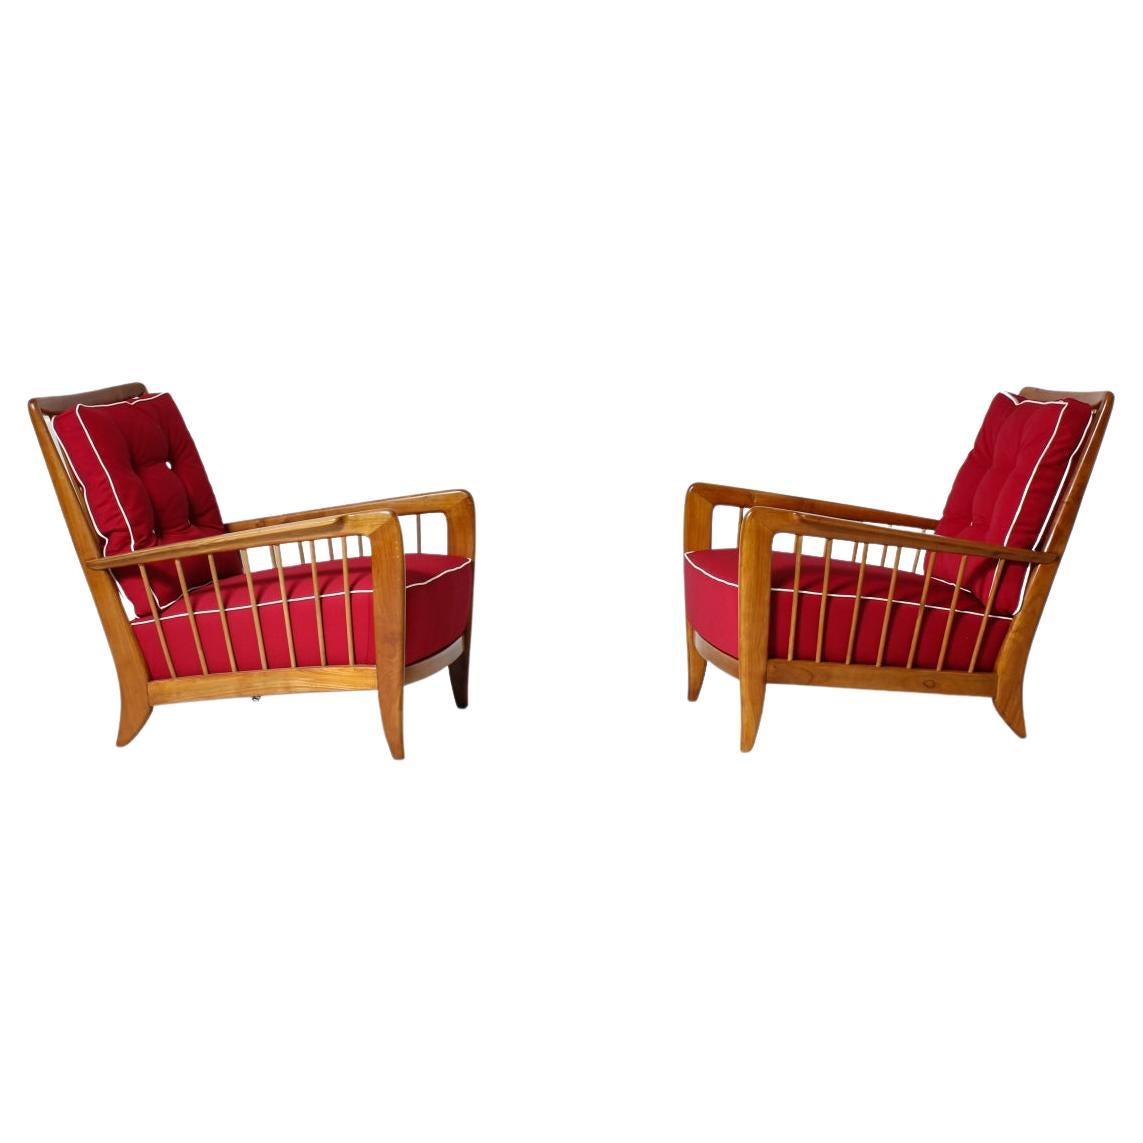 Mid-Century Modern Rare Pair of Cherry Wood Armchairs by Paolo Buffa For Sale